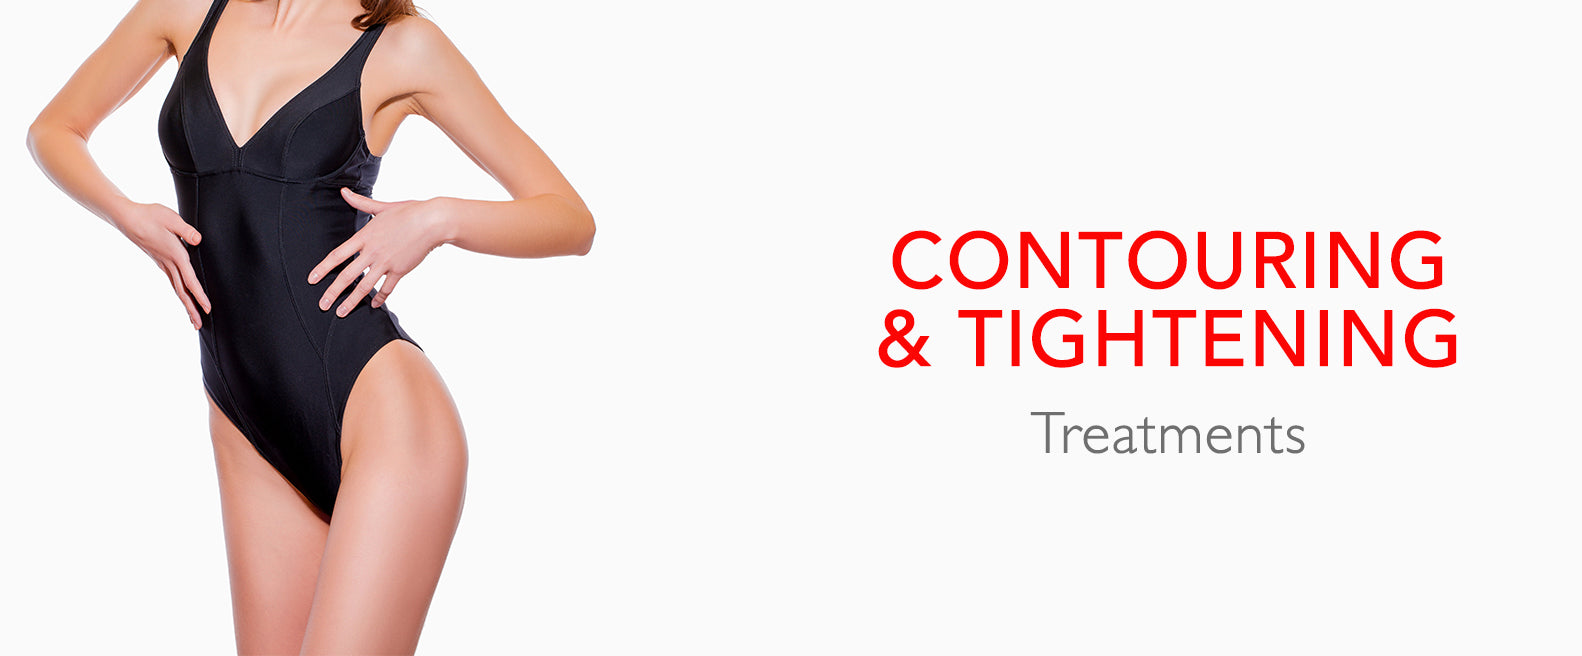 Body Contouring and Tightening Treatments